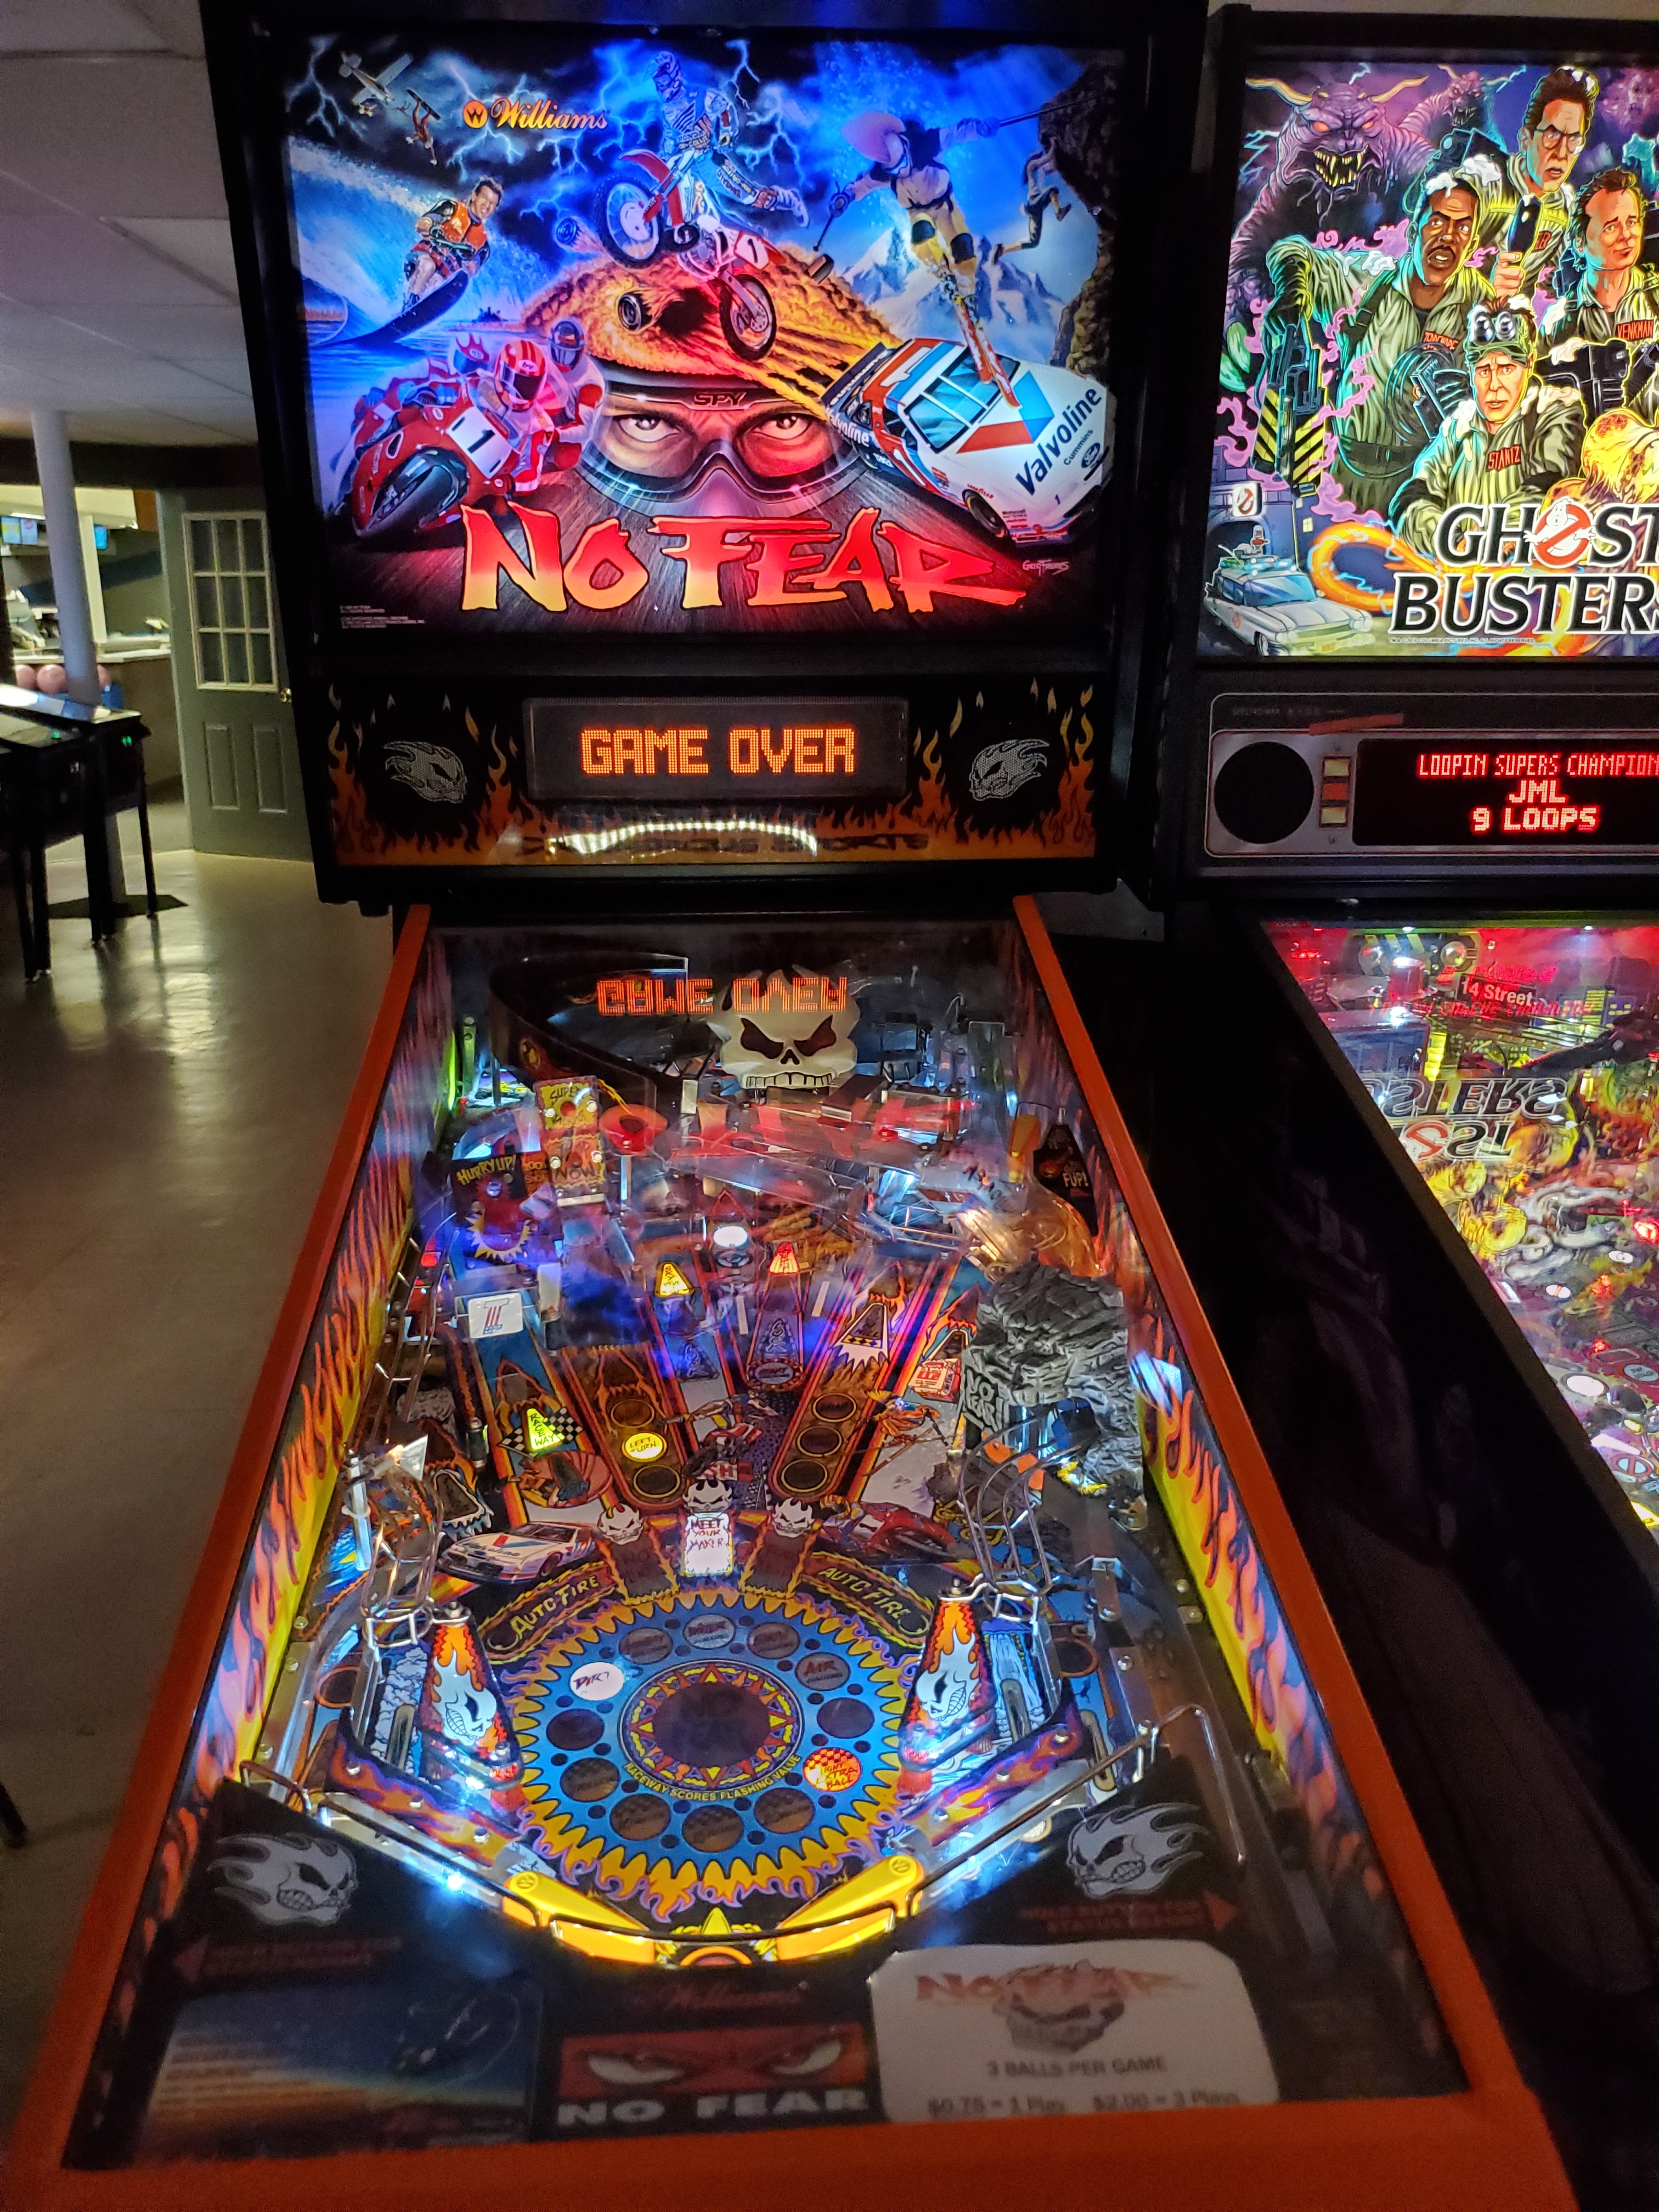 Pinball at Southland Lanes | Southland Lanes in Middleburg Heights, Ohio